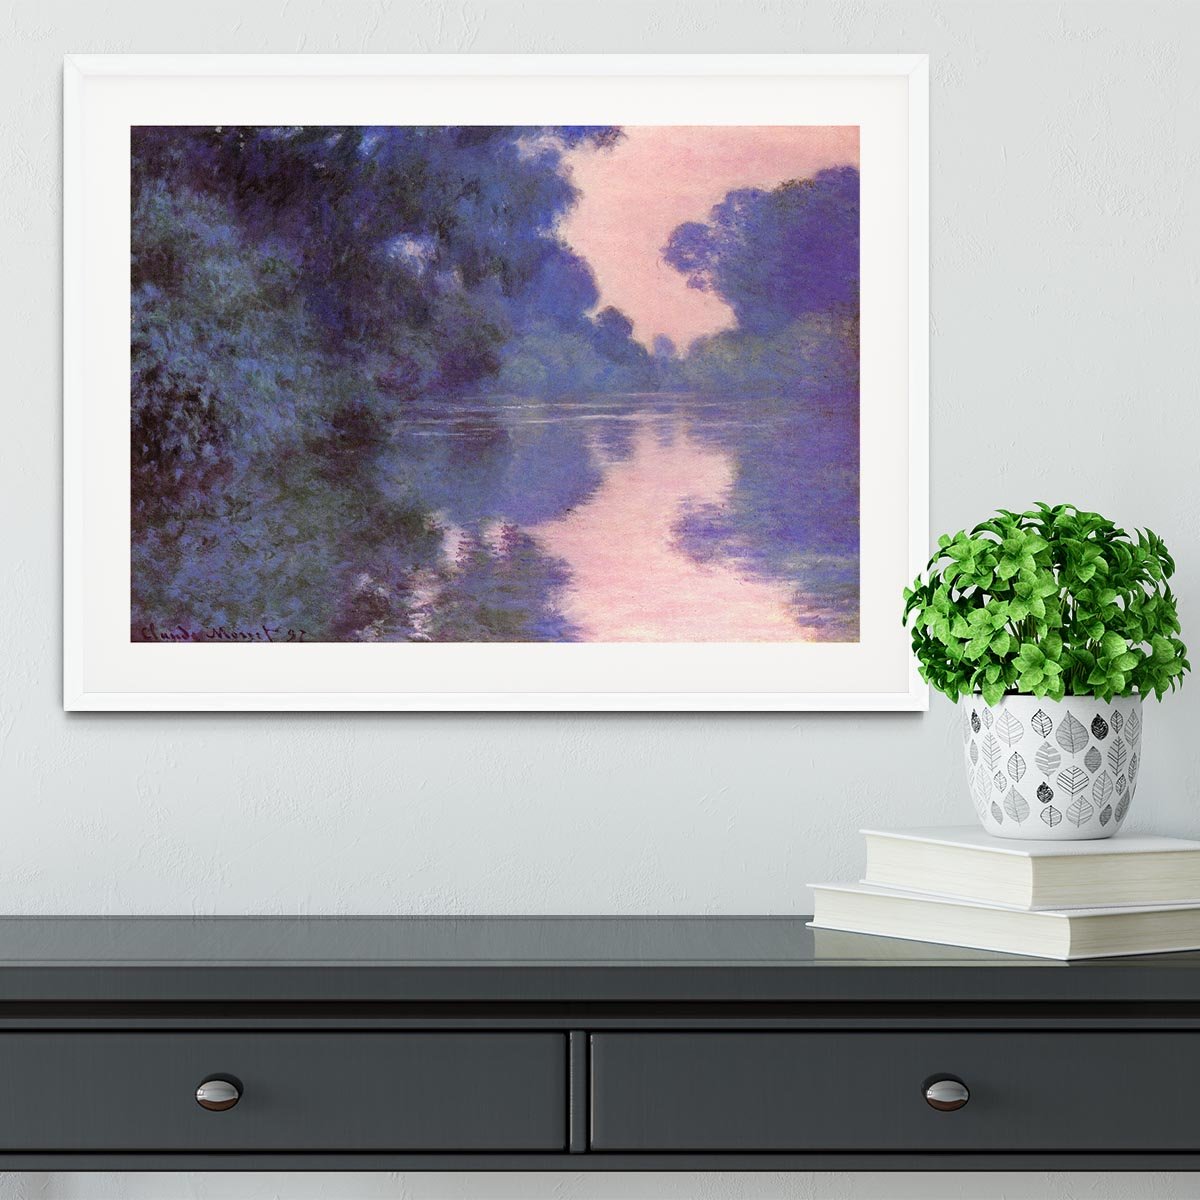 Seine arm at Giverny by Monet Framed Print - Canvas Art Rocks - 5